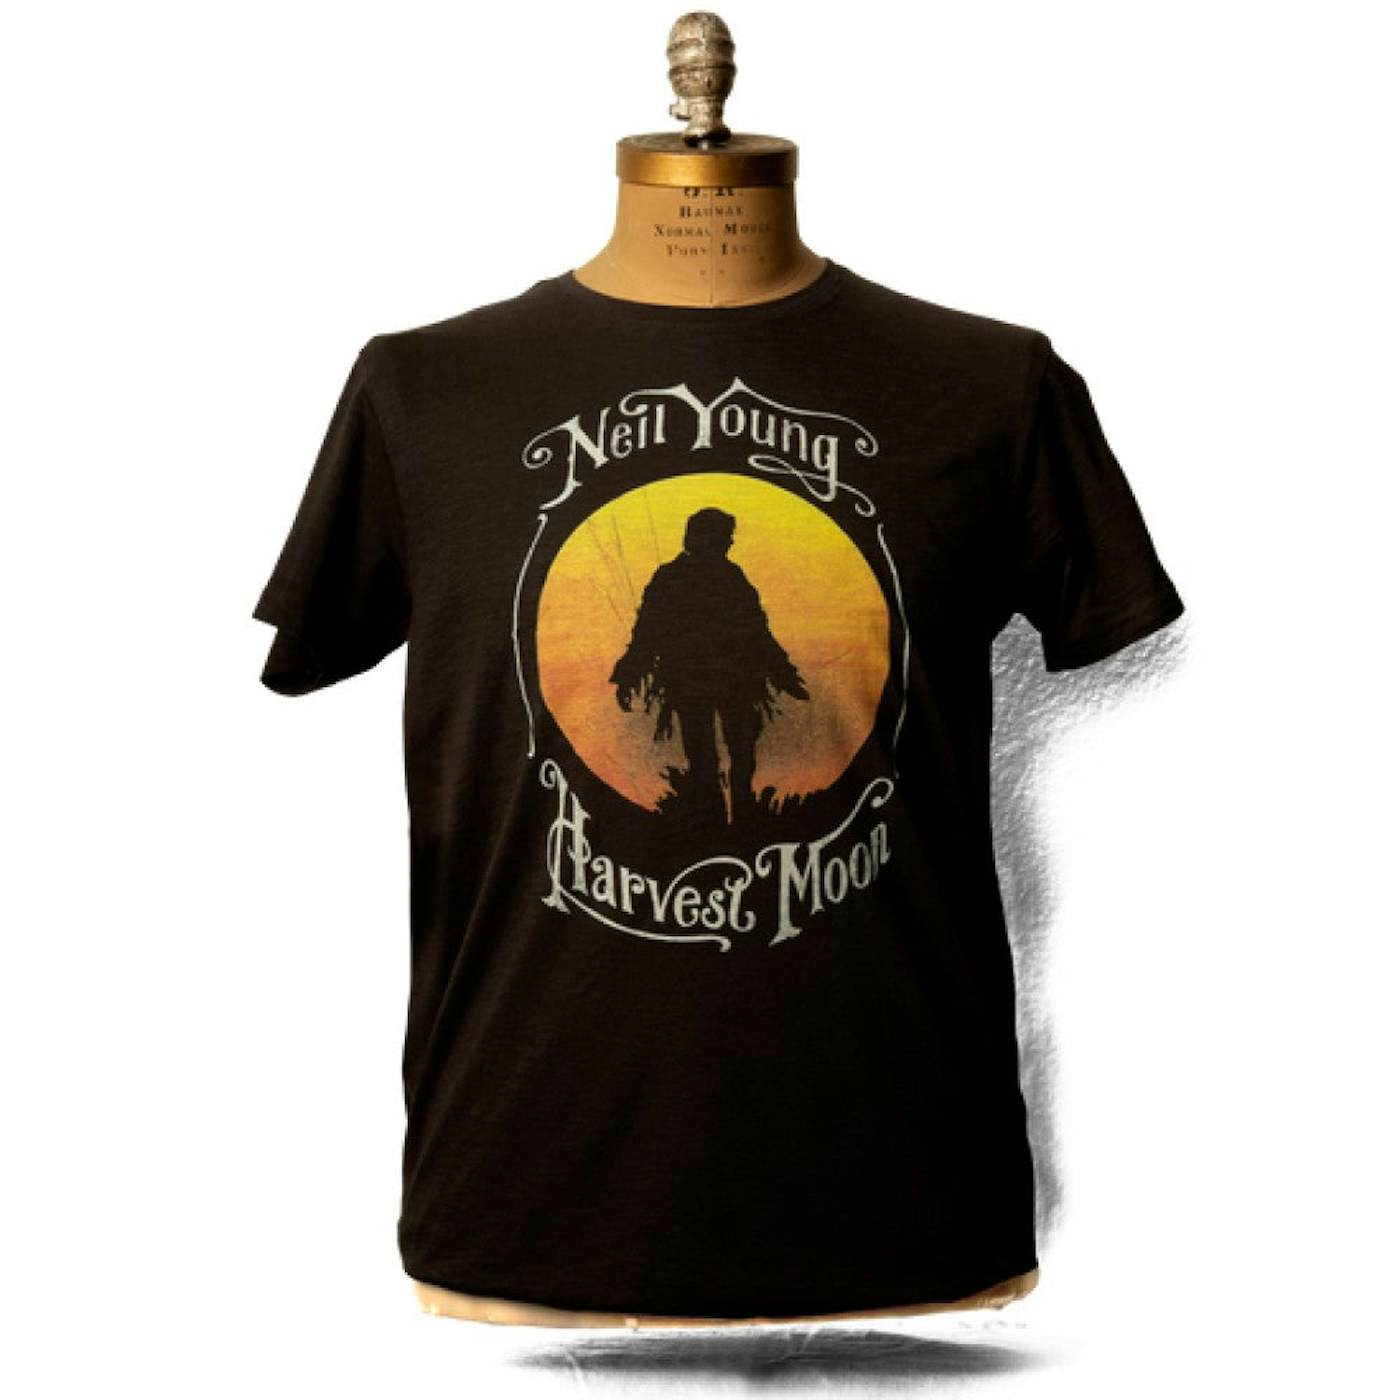 Neil Young Harvest Moon New T-Shirt